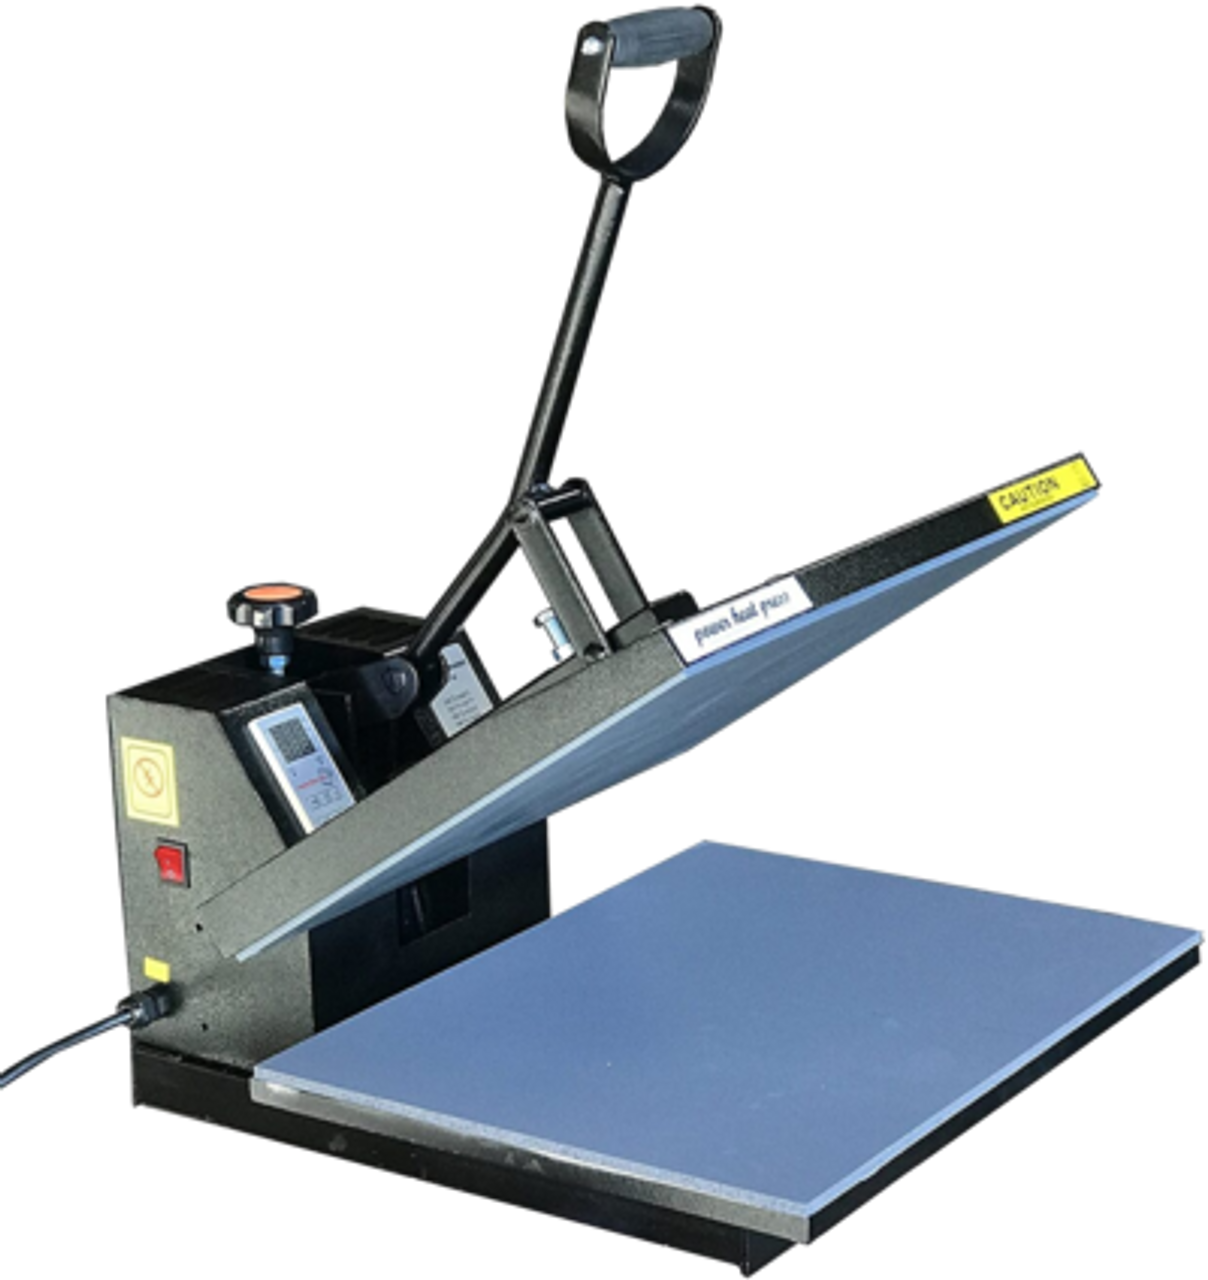 Air Automatic Heat Press Machine for T shirts, cloth, mouse pads